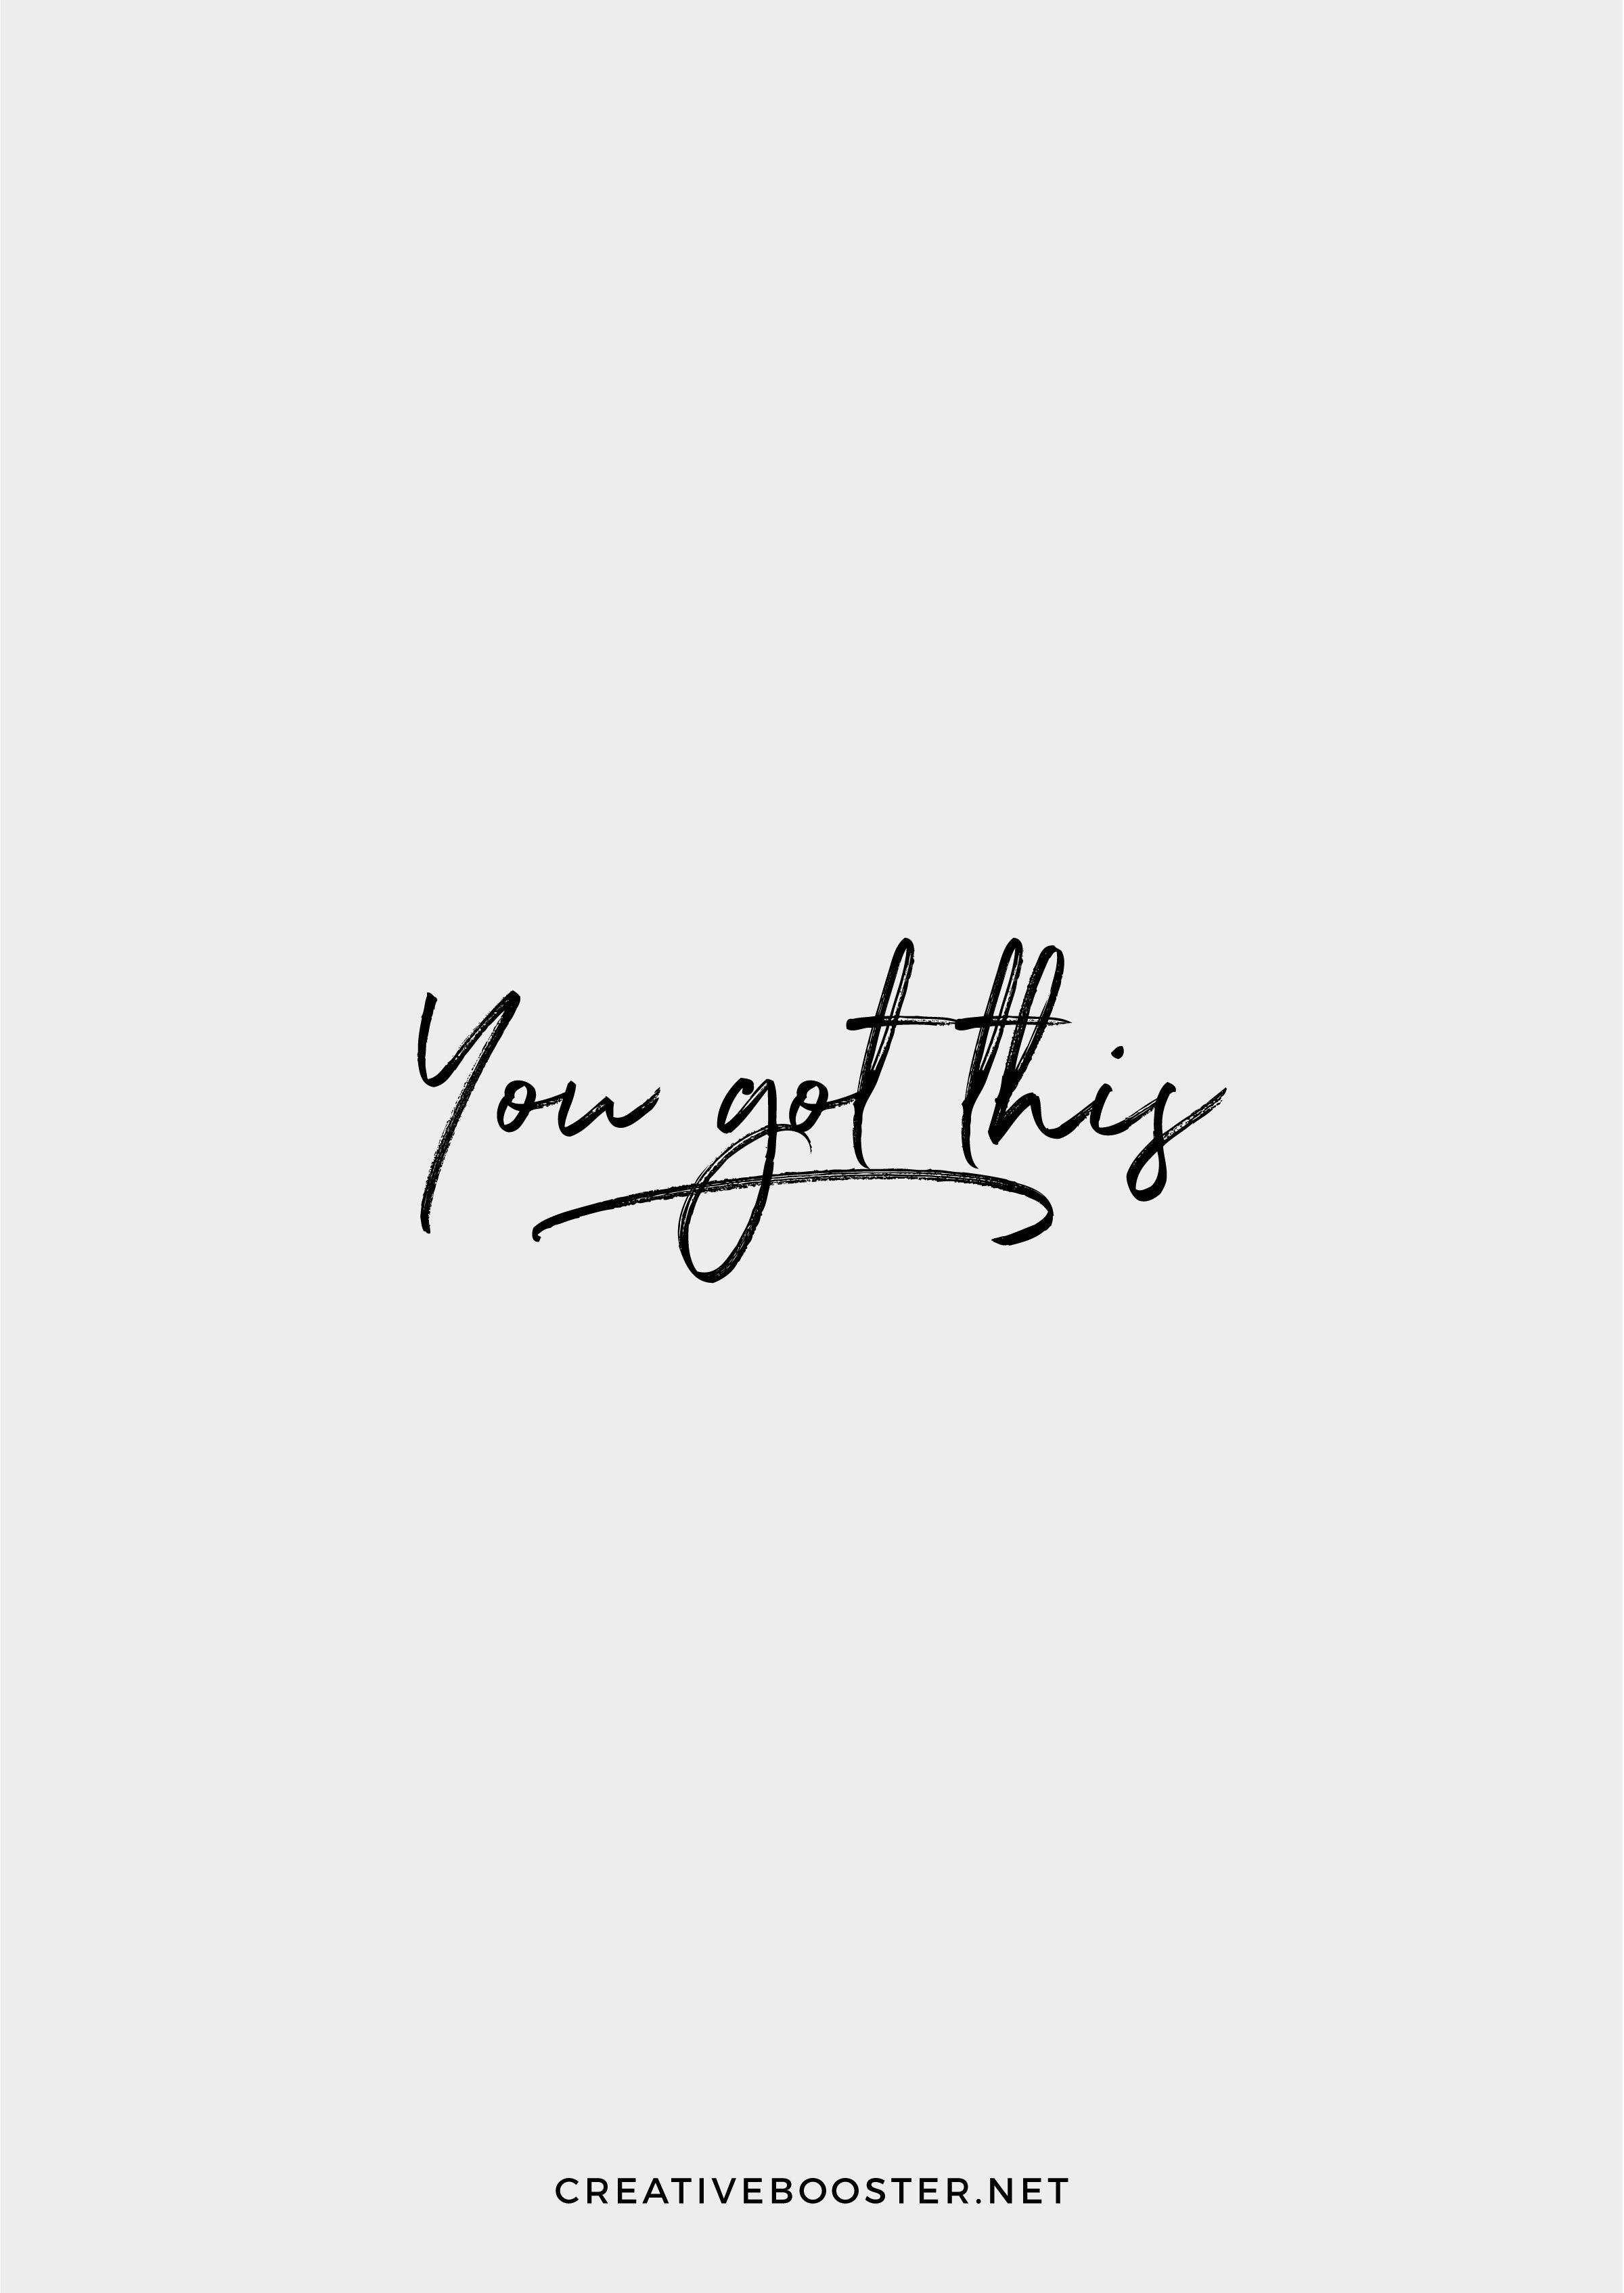 Short-You-Got-This-Quotes-with-Art-Print-Text-"You got this!" (Quote Art Print)